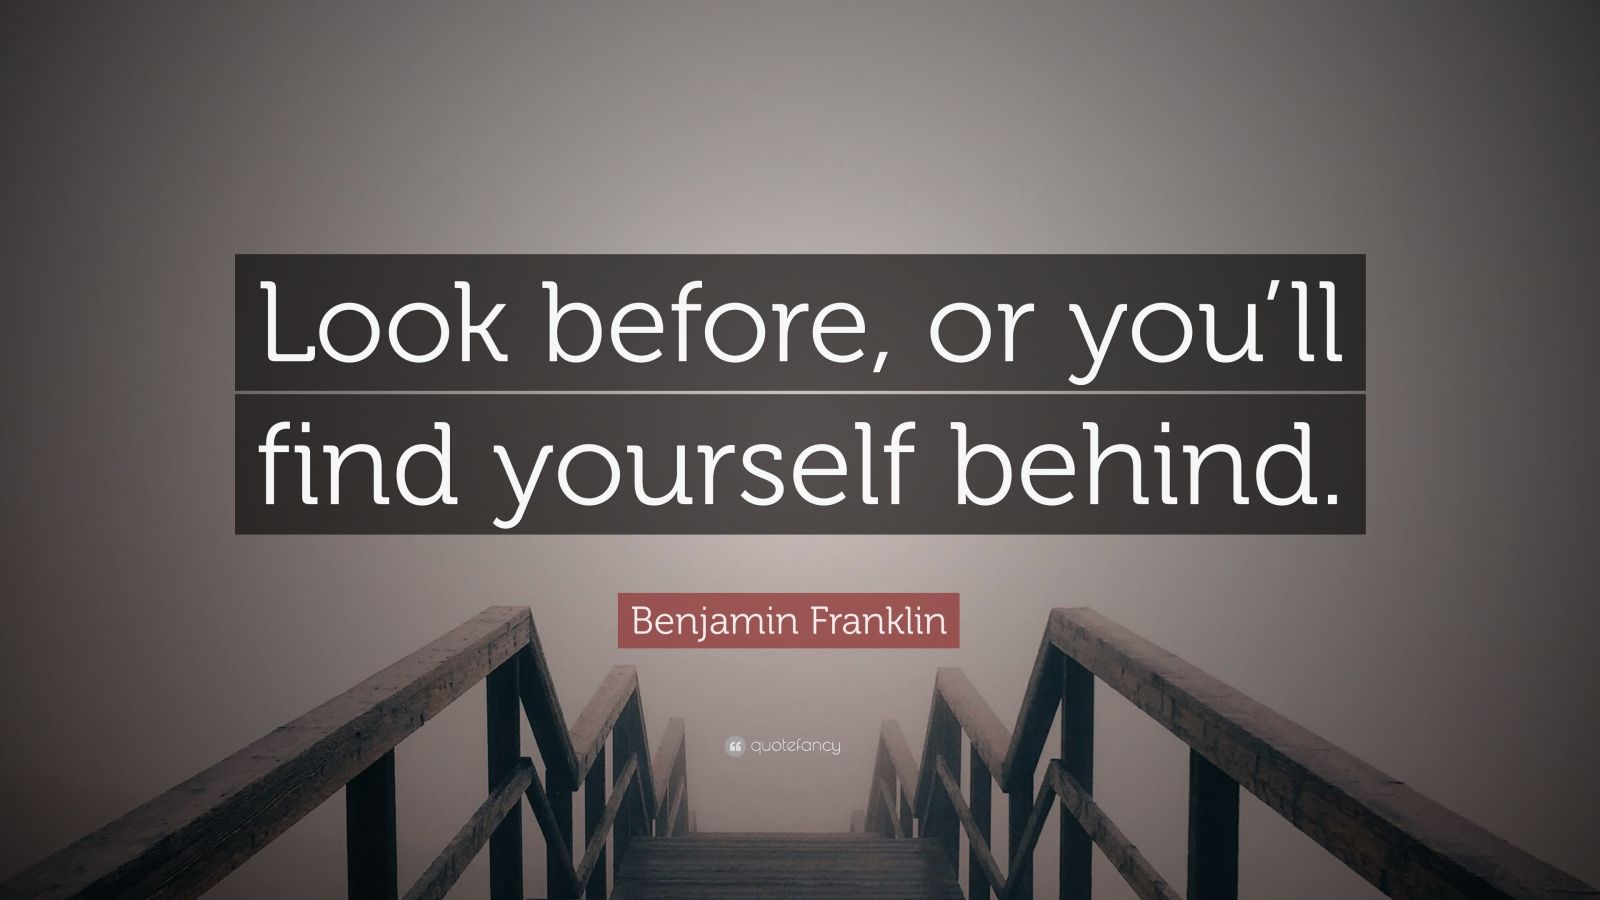 Benjamin Franklin Quote: “Look before, or you’ll find yourself behind Look Before Or You'll Find Yourself Behind